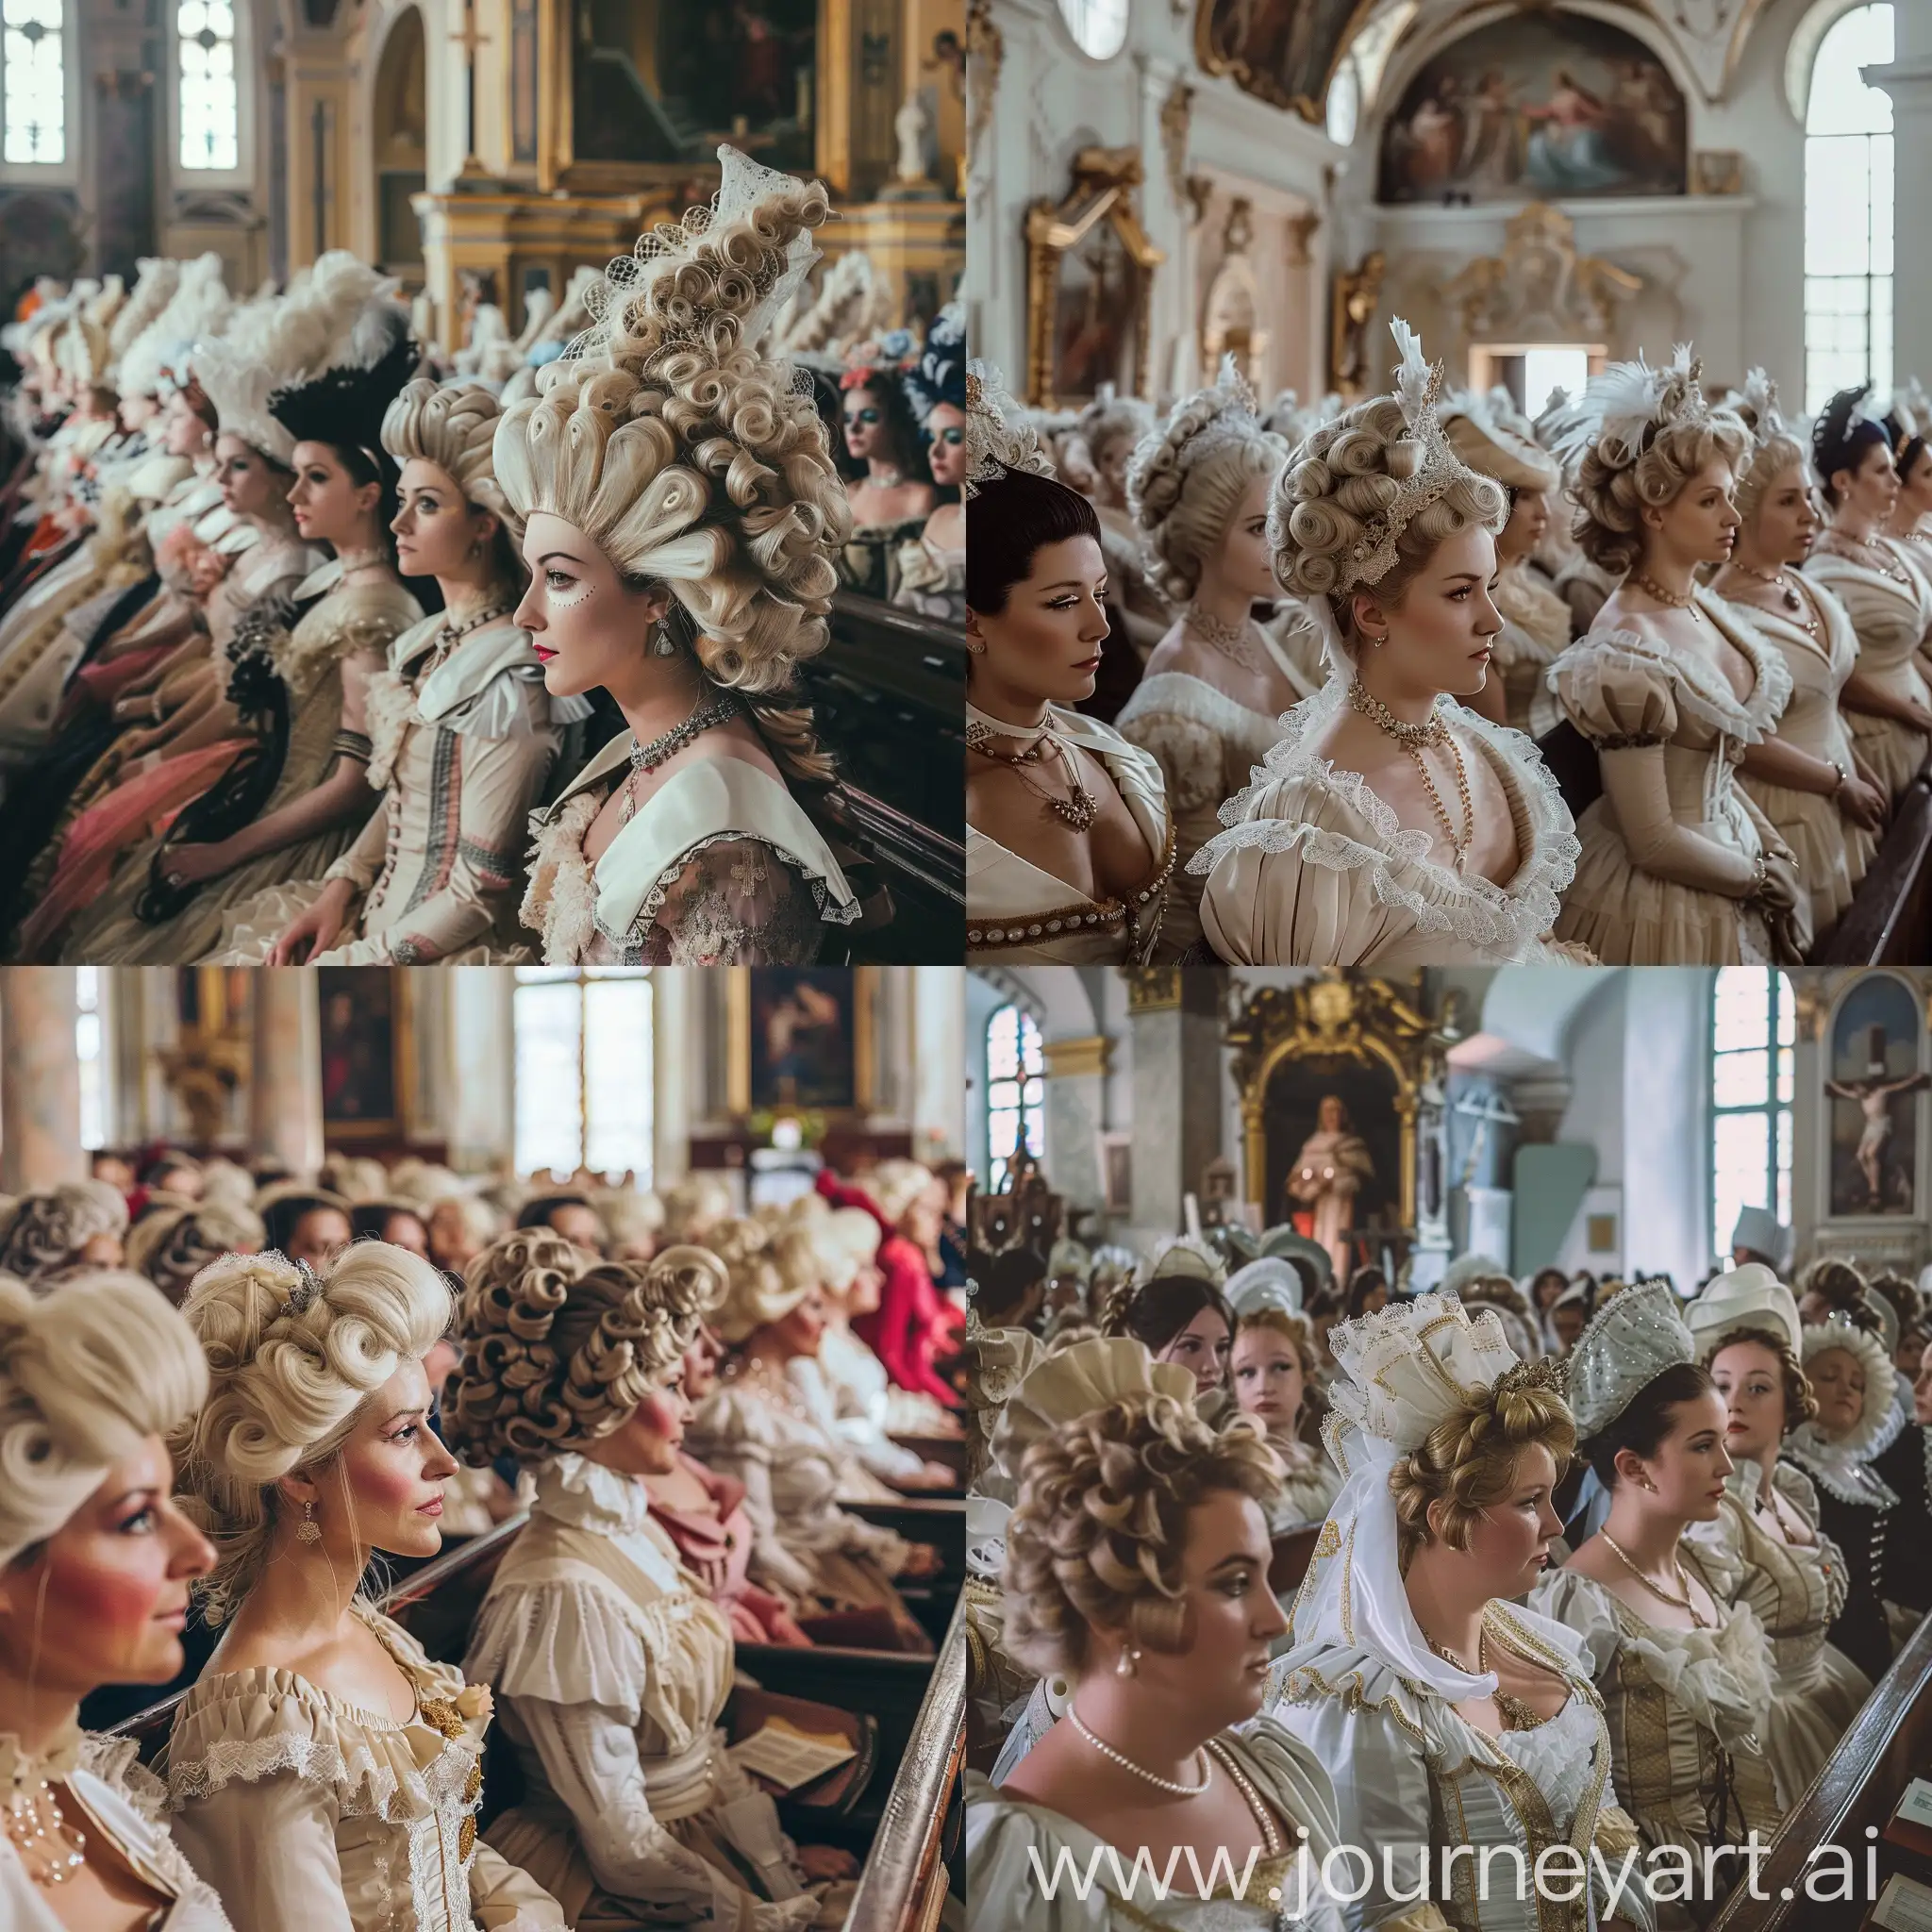 Elegant-Women-in-Marie-Antoinette-Costumes-Gathered-in-a-Church